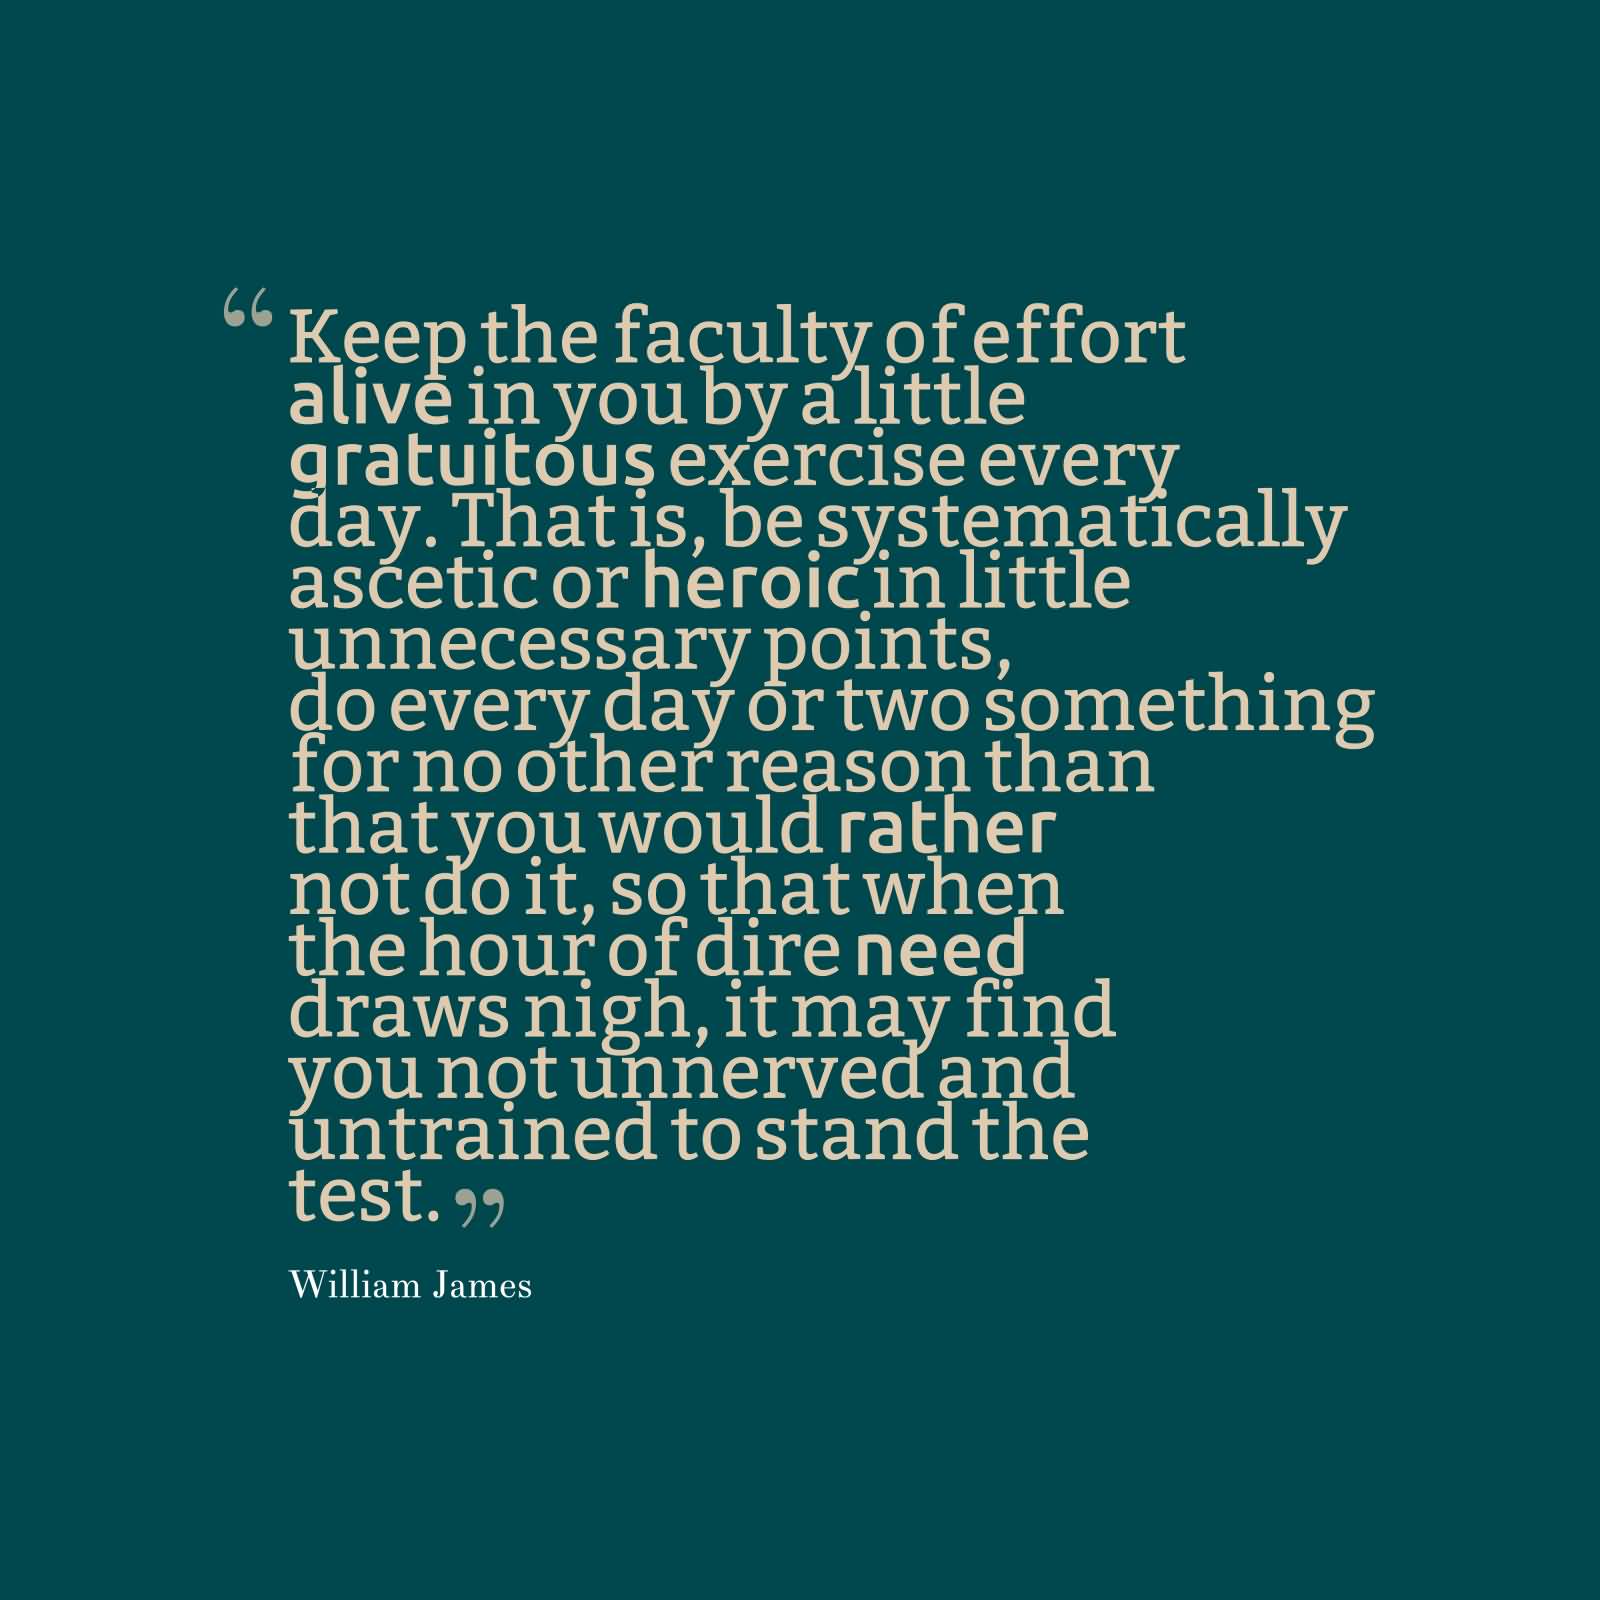 Keep the faculty of effort alive in you by a little gratuitous exercise every day. That is, be systematically ascetic or heroic in little unnecessary points, do every day or two something for no other reason than that you would rather not do it, so that when the hour of dire need draws nigh, it may find you not unnerved and untrained to stand the test. - William James